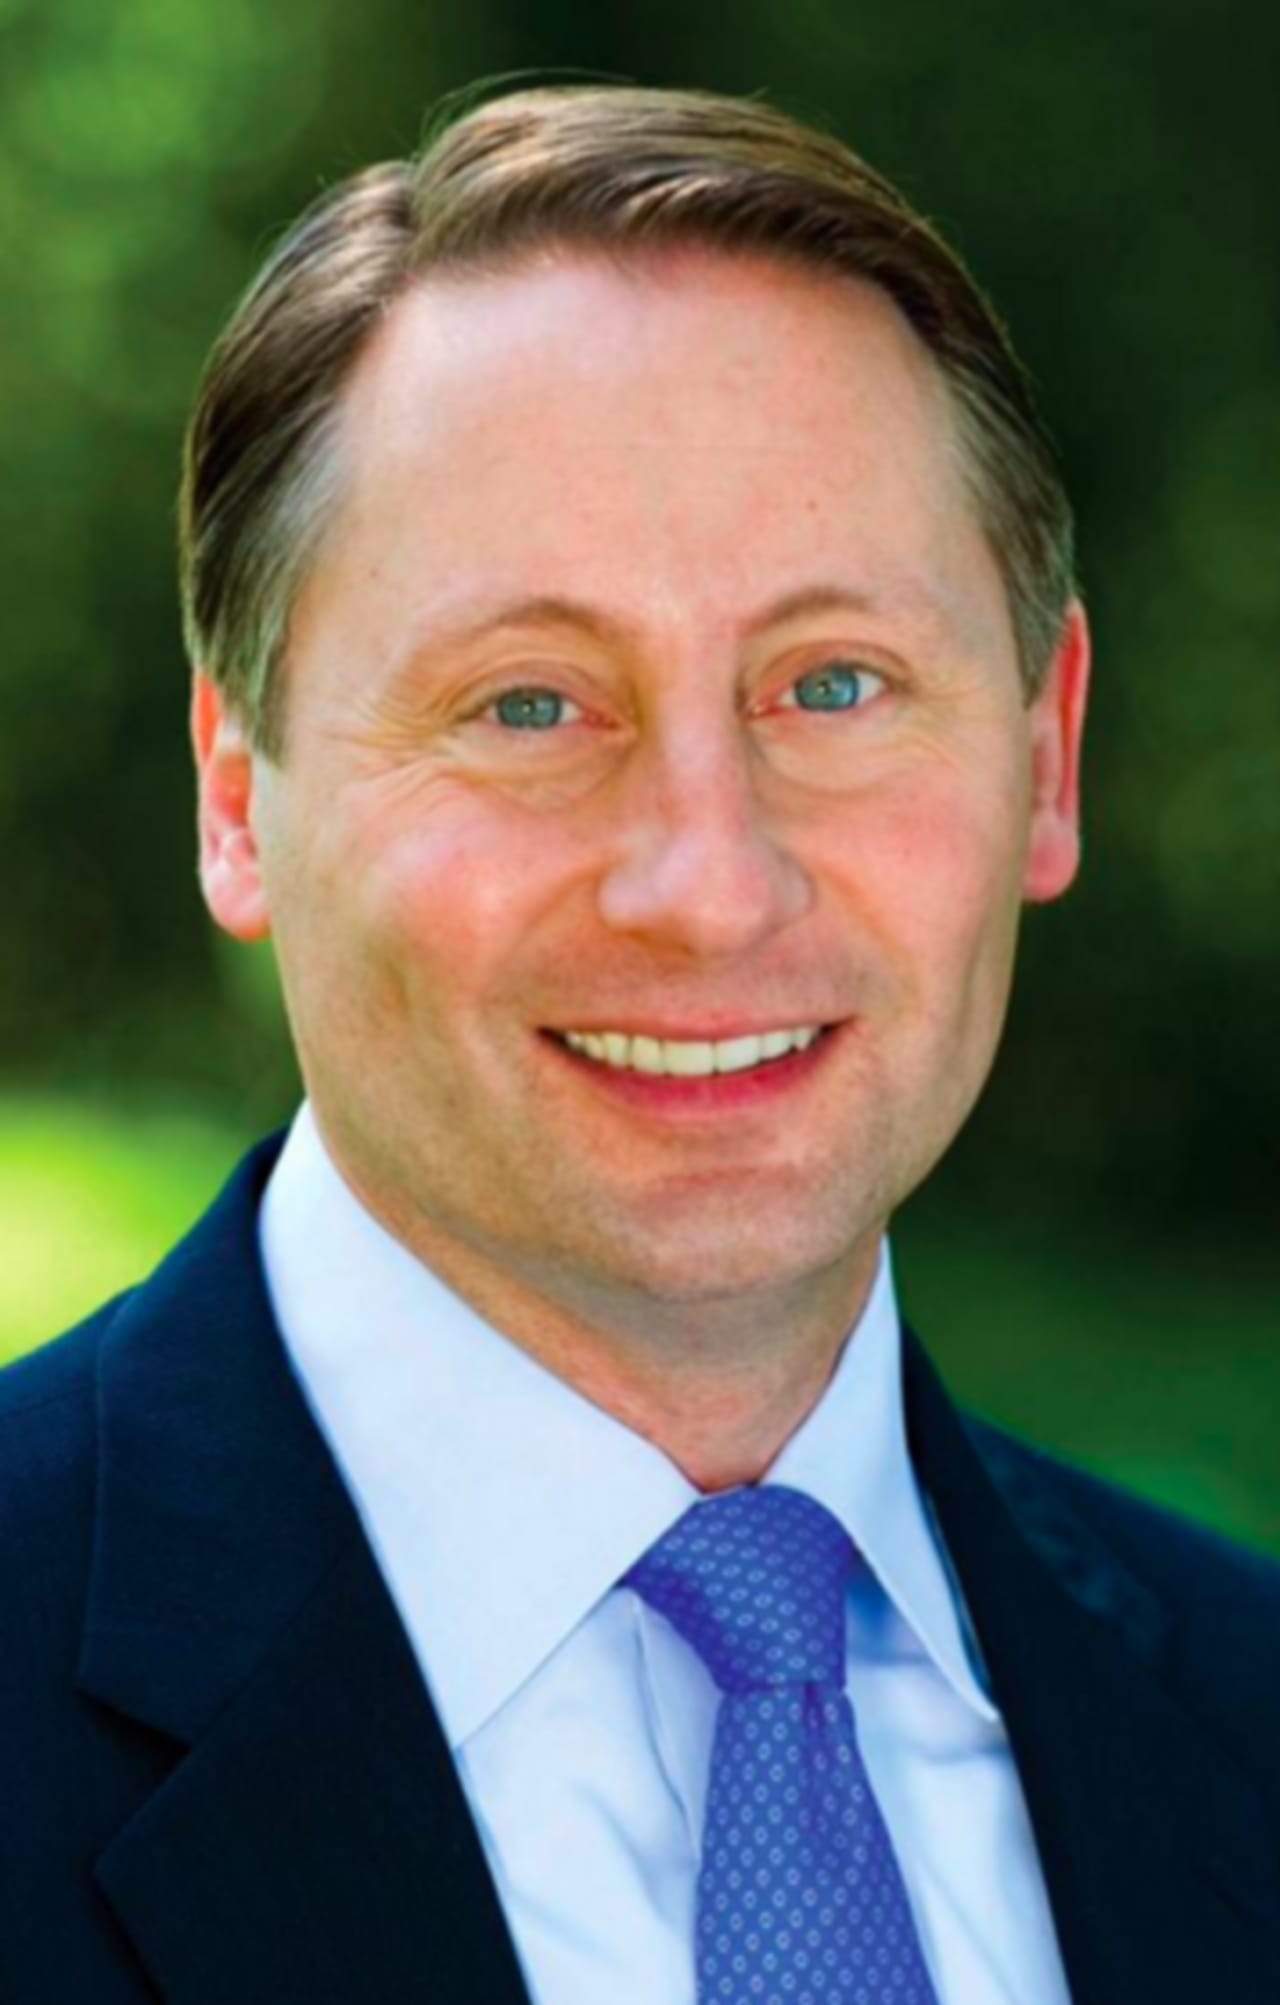 Some county officials say the time has come to reconsider County Executive Rob Astorino's pledge to not raise property taxes in light of a projected $17.6 million budget shortfall.